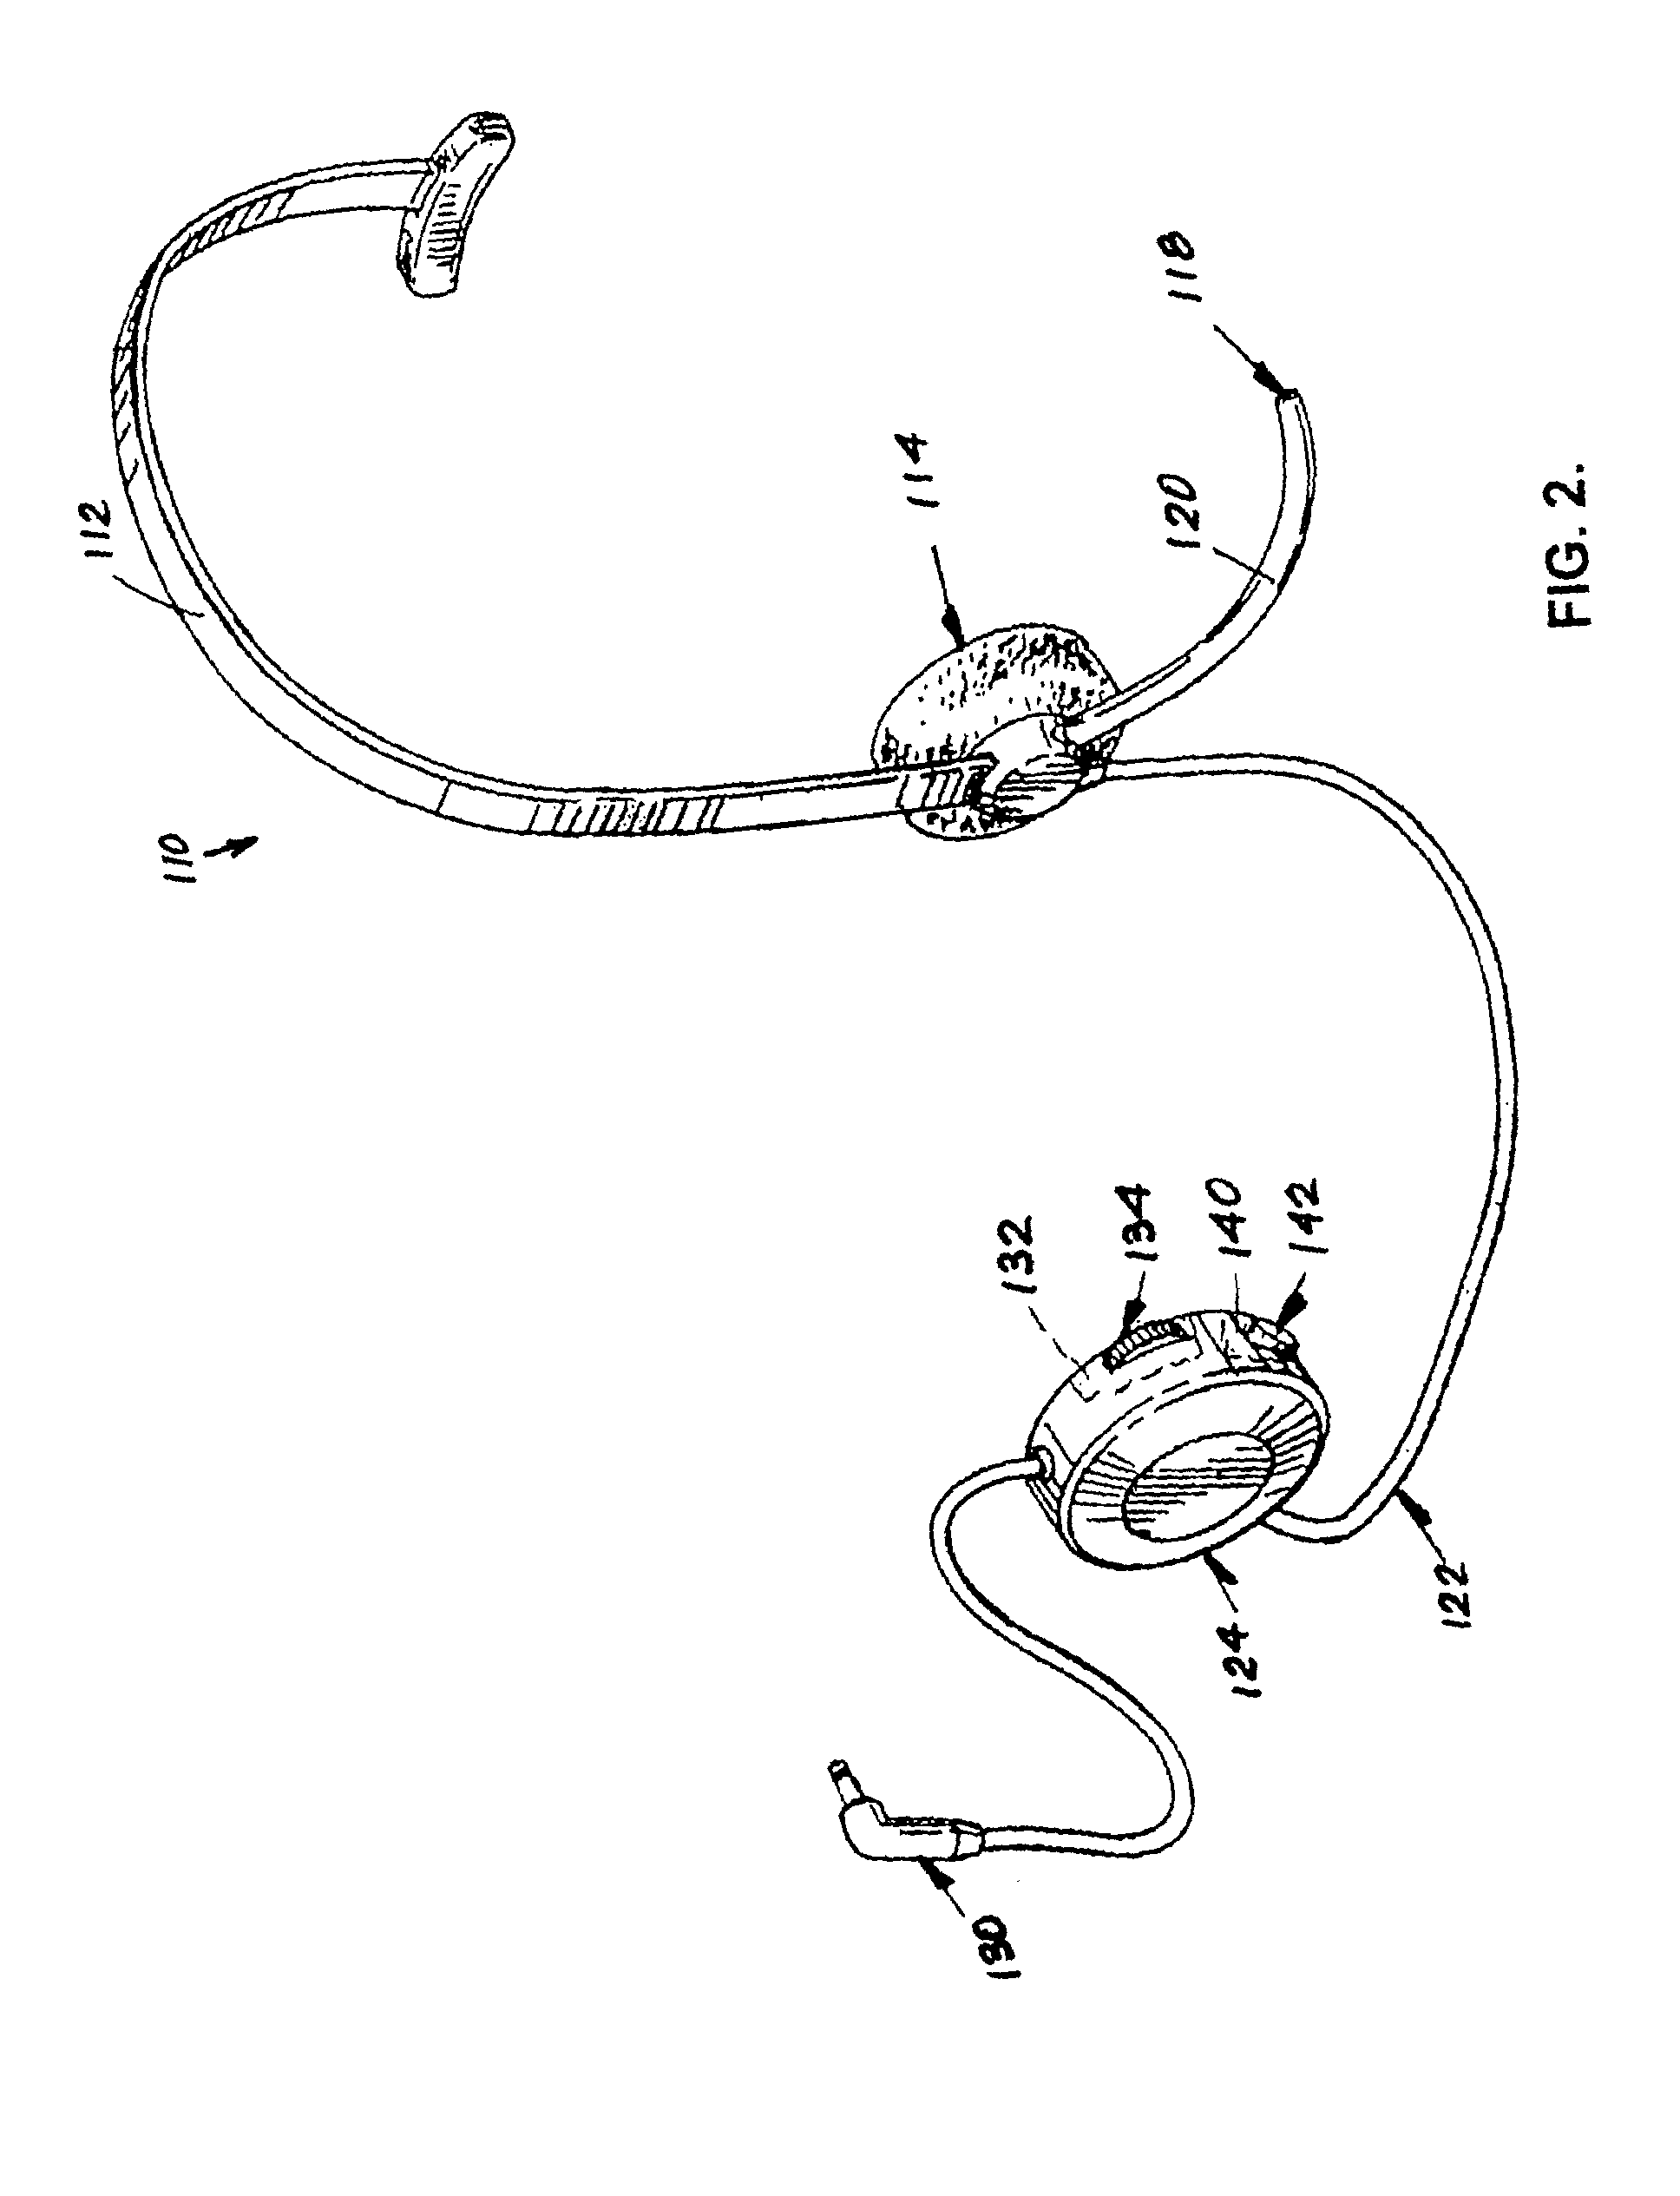 Accessory for supporting a cellular telephone in a motor vehicle